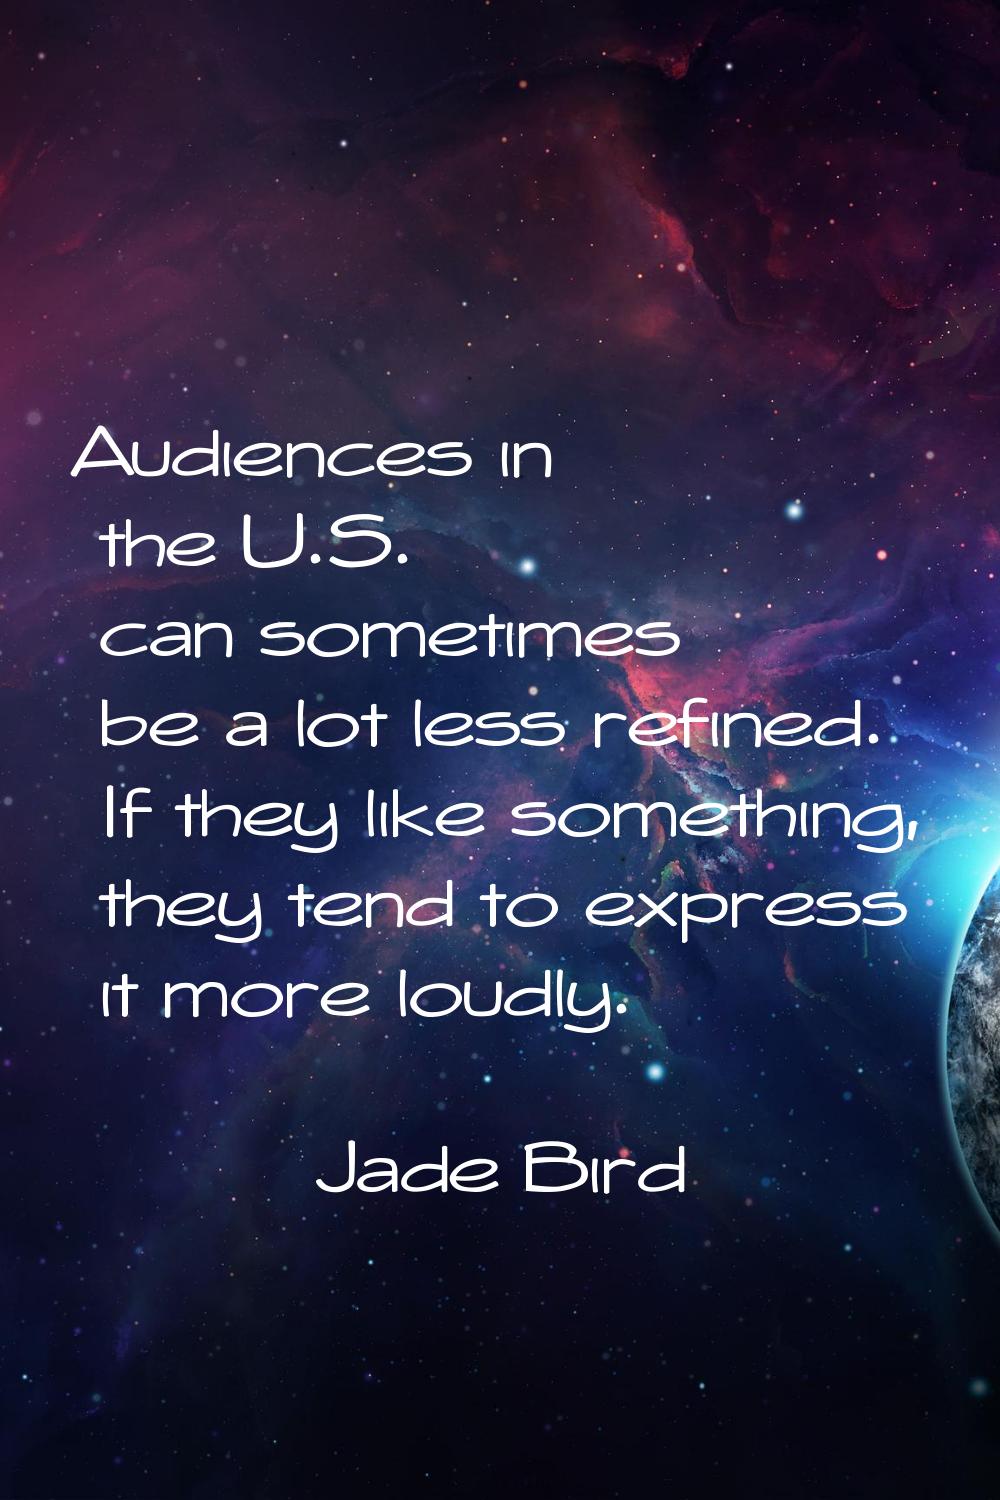 Audiences in the U.S. can sometimes be a lot less refined. If they like something, they tend to exp